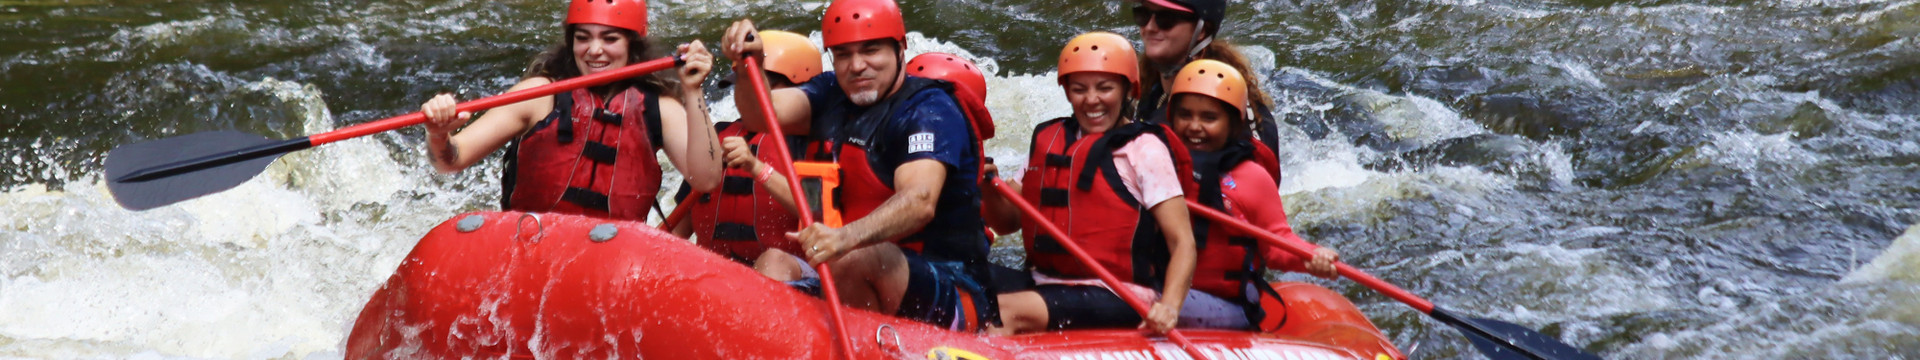 White Water Rafting | Rock N Roll Rapids Vacation Package Terms & Conditions | Westgate Sports & Entertainment